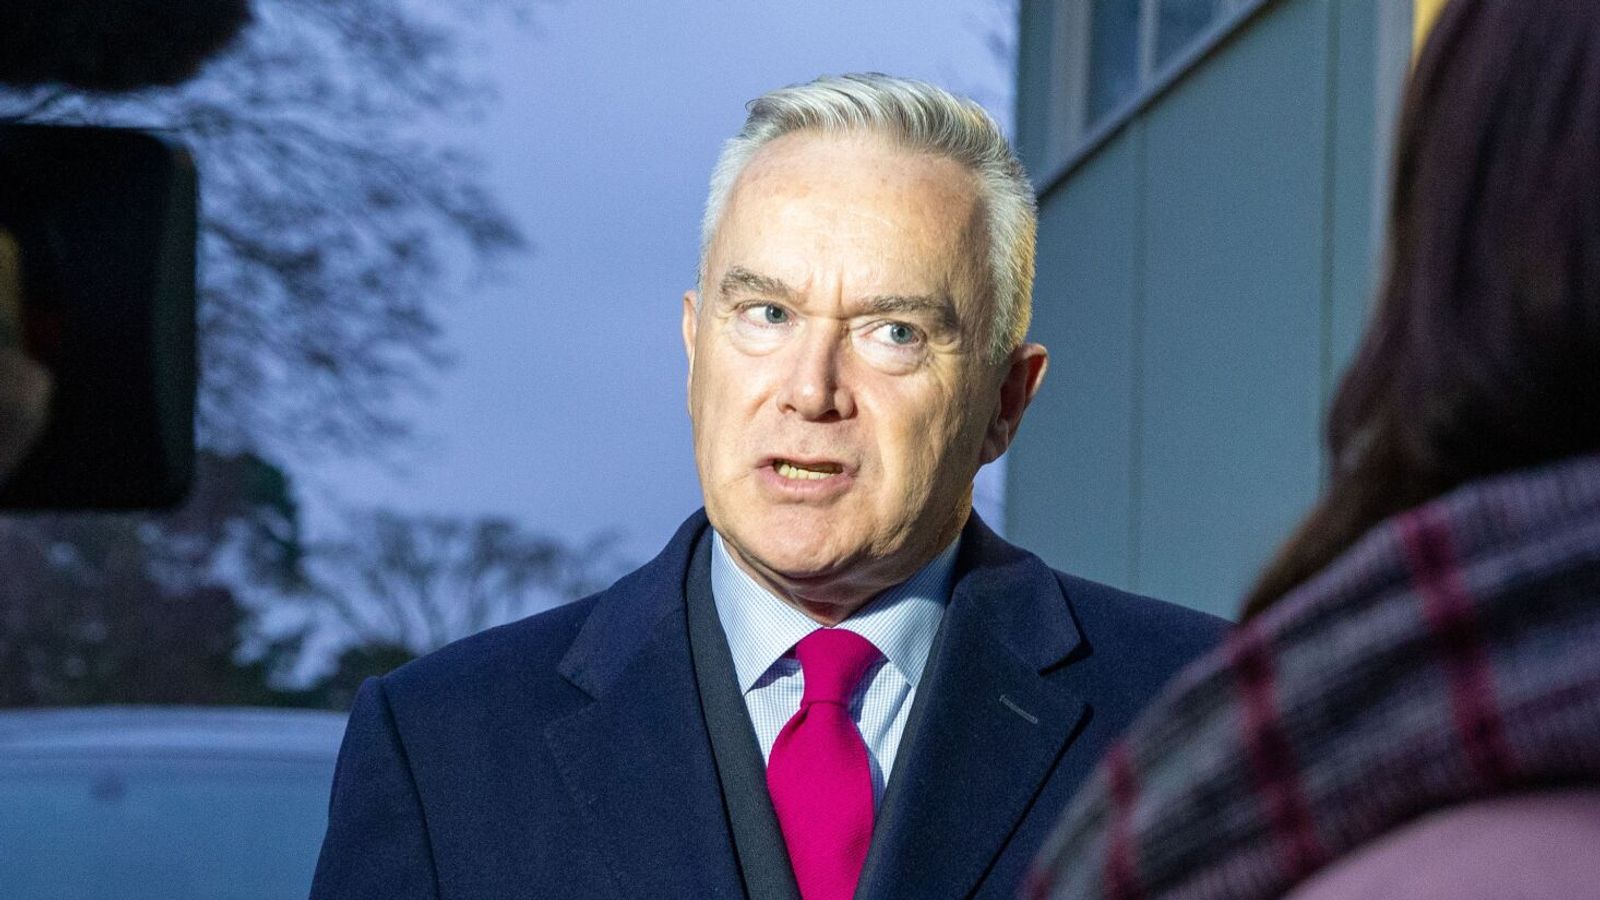 Huw Edwards scandal: BBC 'in touch' with family of person at centre of explicit photos allegations - corporation boss Tim Davie